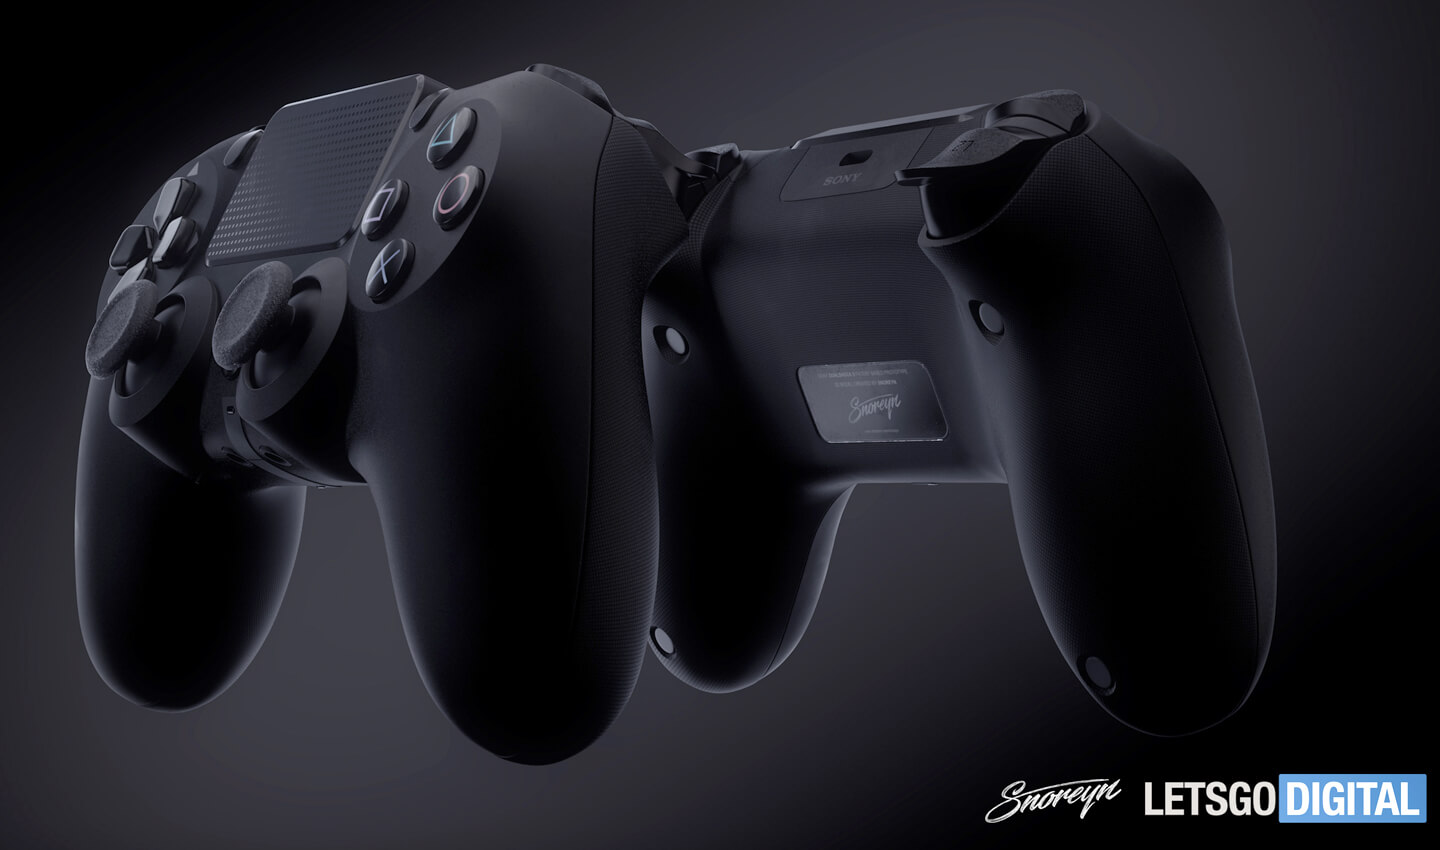 Sony PlayStation 5 controller